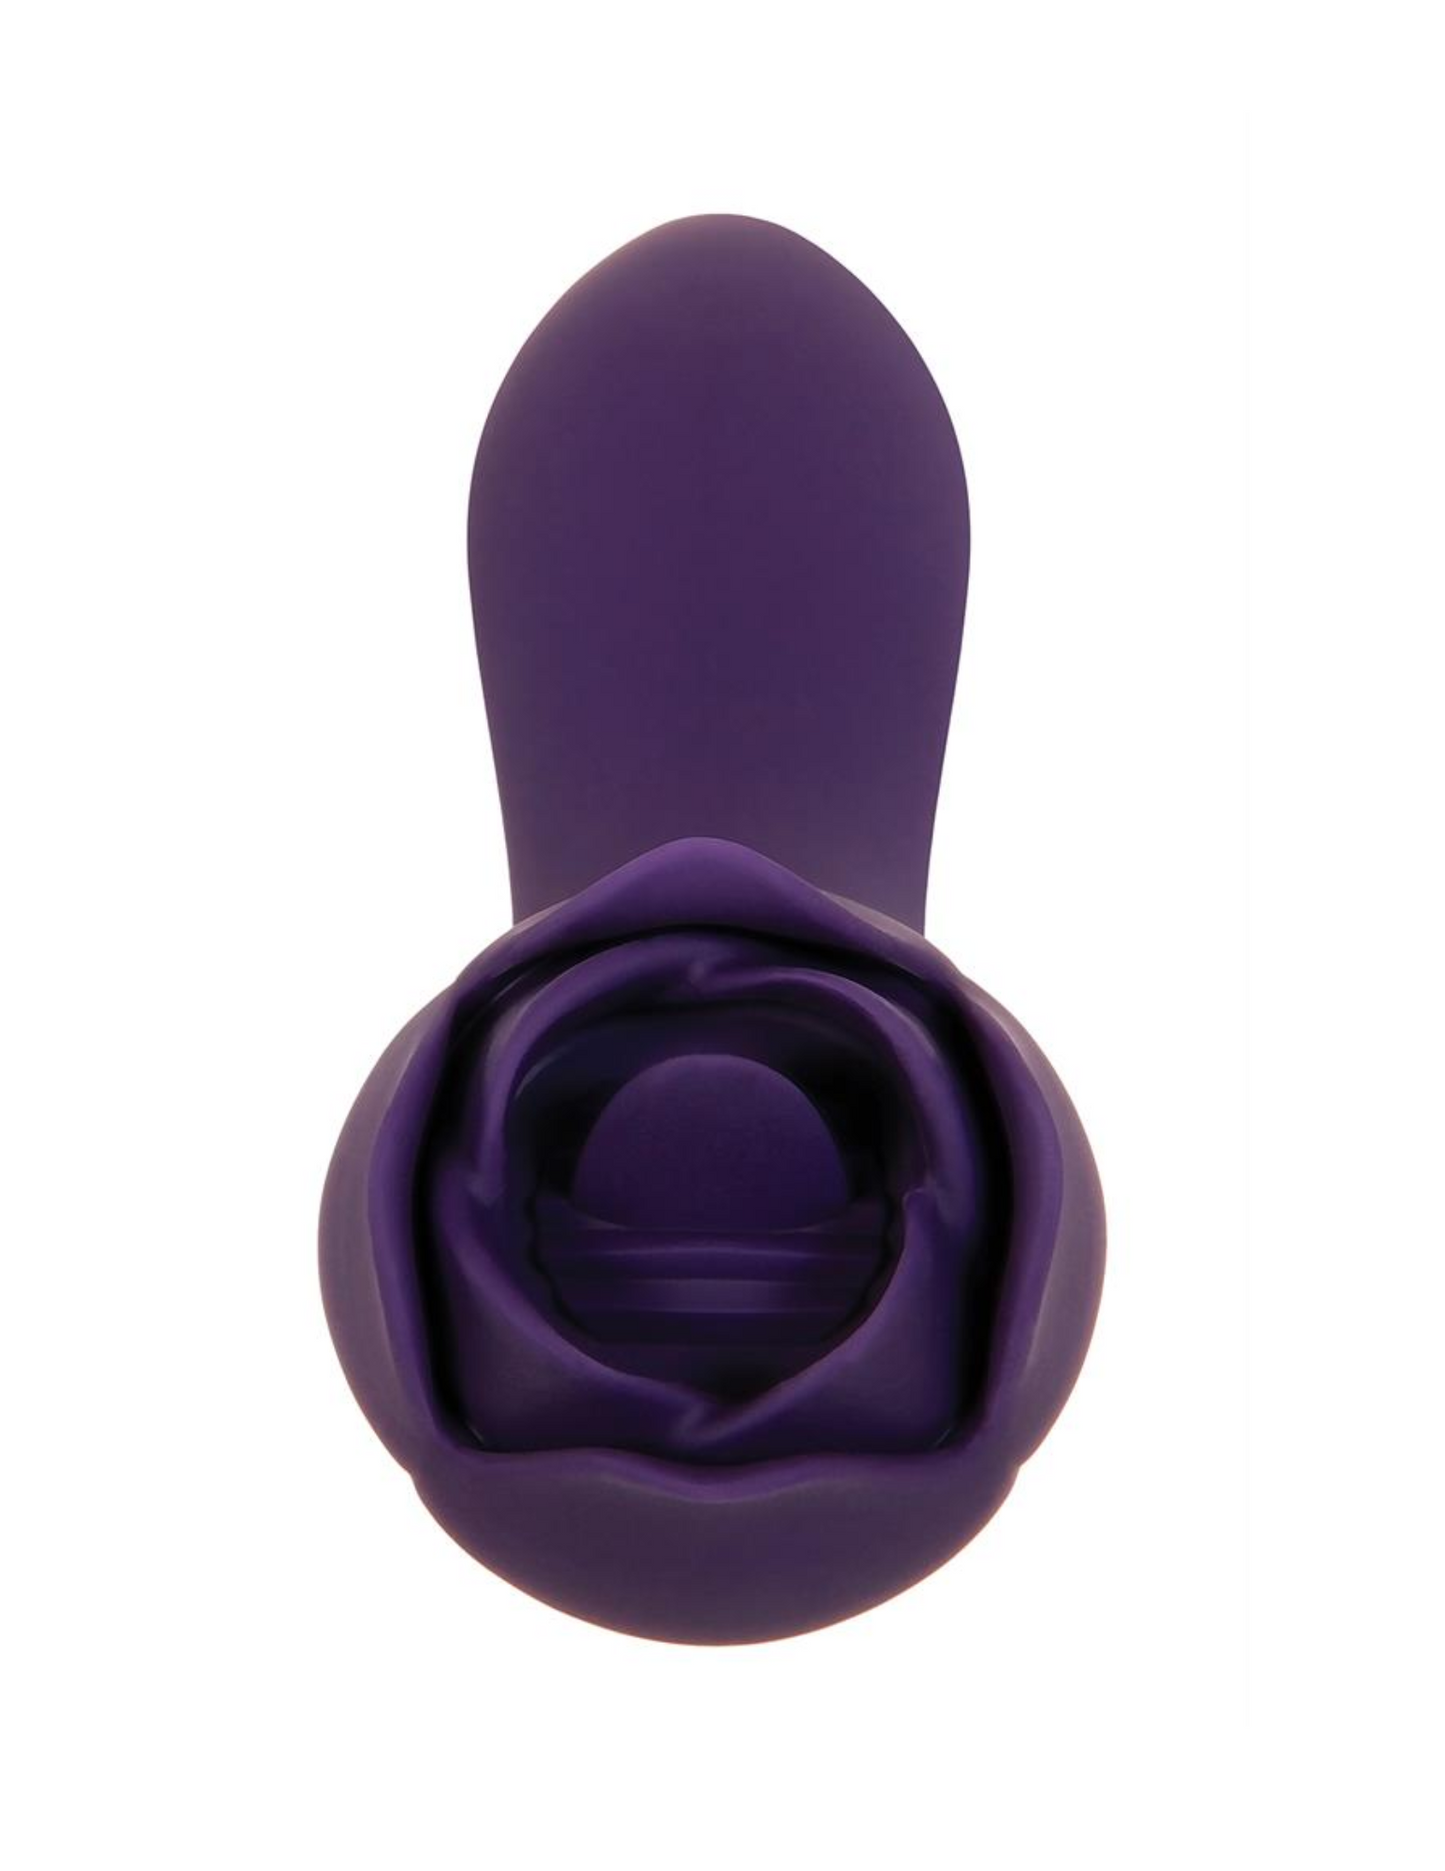 Close-up of the flicking tongue and flexible petals on the Thorny Rose Rechargeable Silicone Dual-Ended Vibrator and Clitoral Flicker from Evolved.